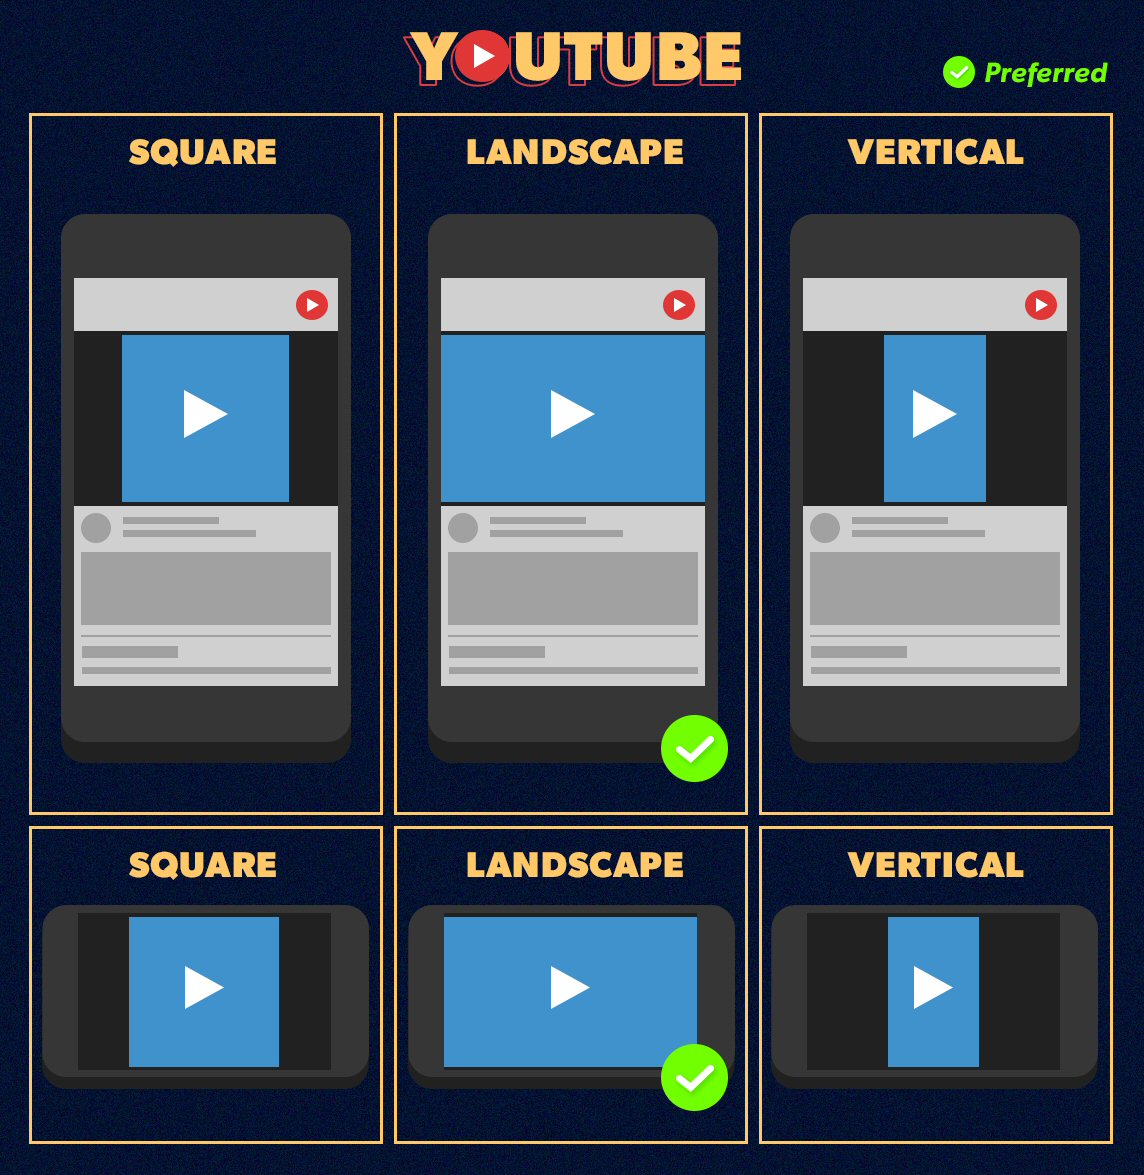 Best Video Aspect Ratio for YouTube on Mobile